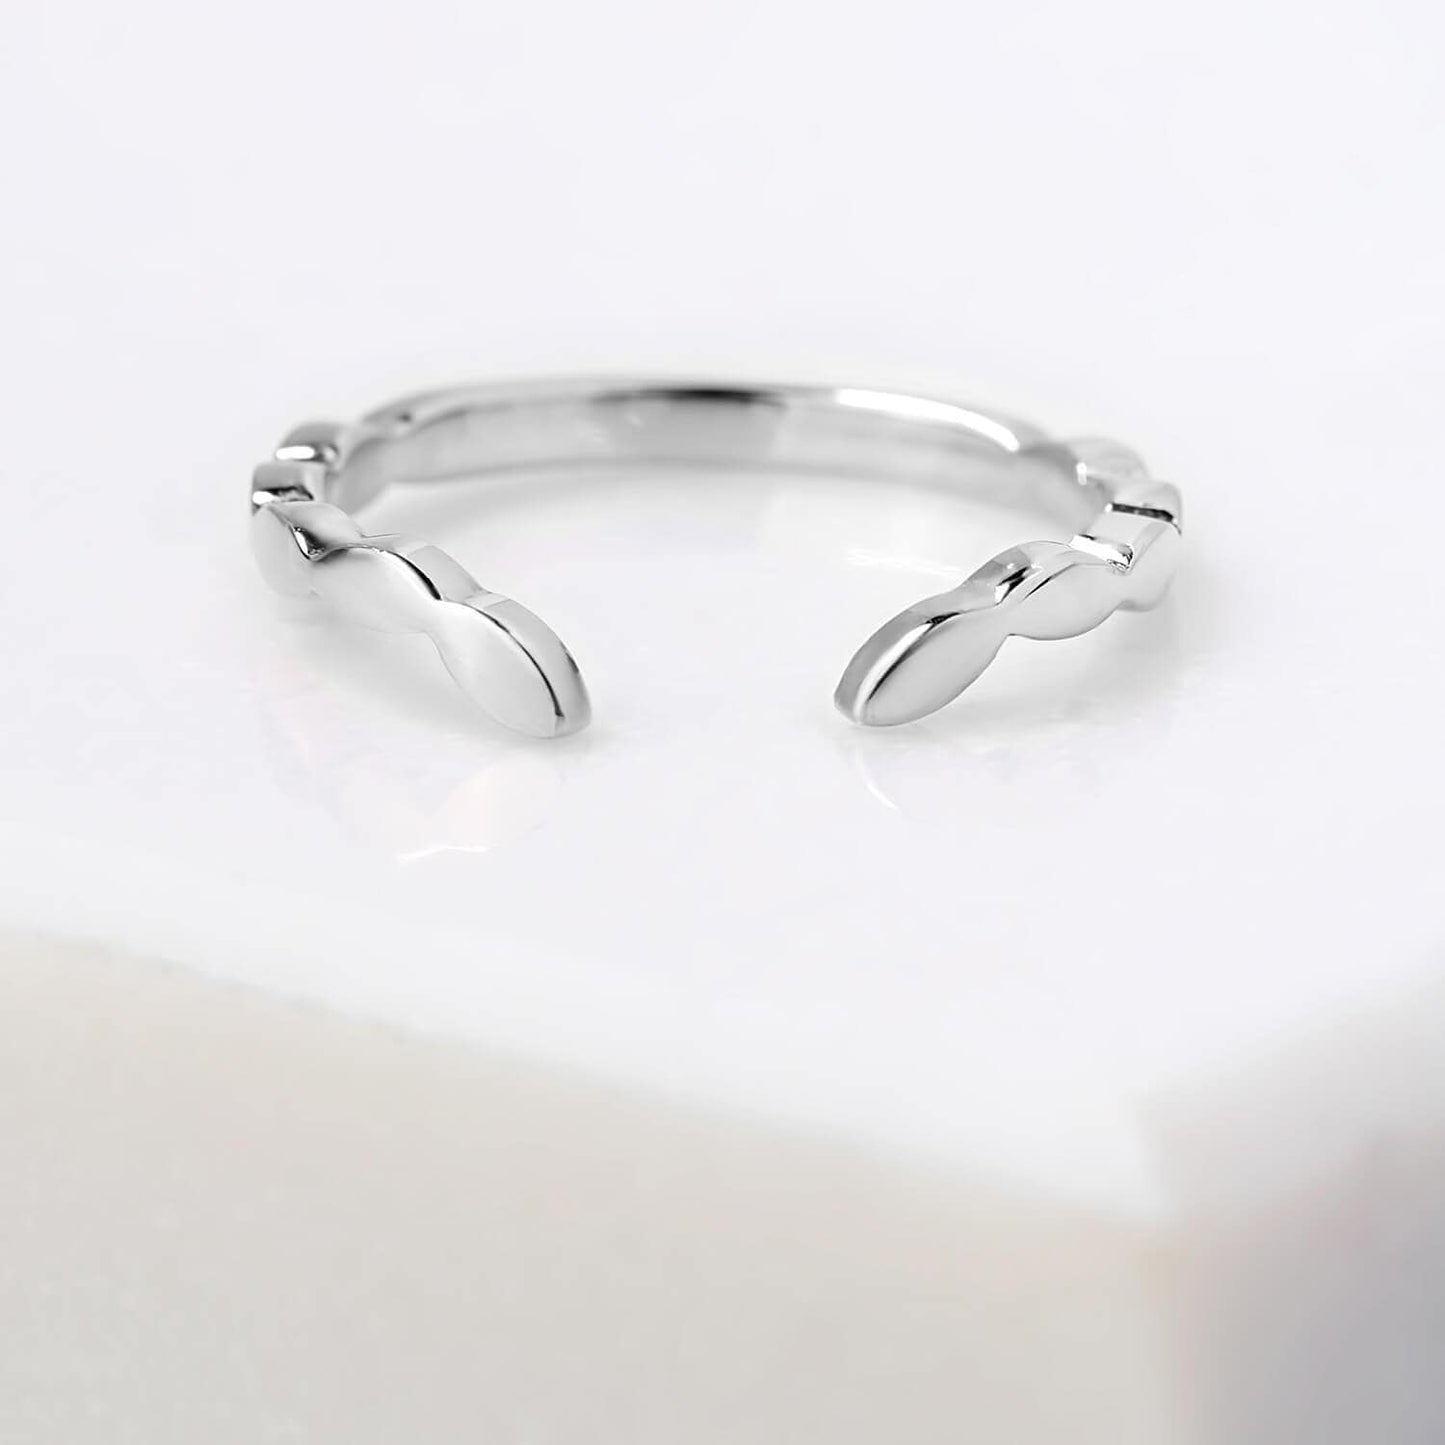 Chevron leaf profile, mirror finished 2 millimetre wide ring in 14 karat recycled white gold.